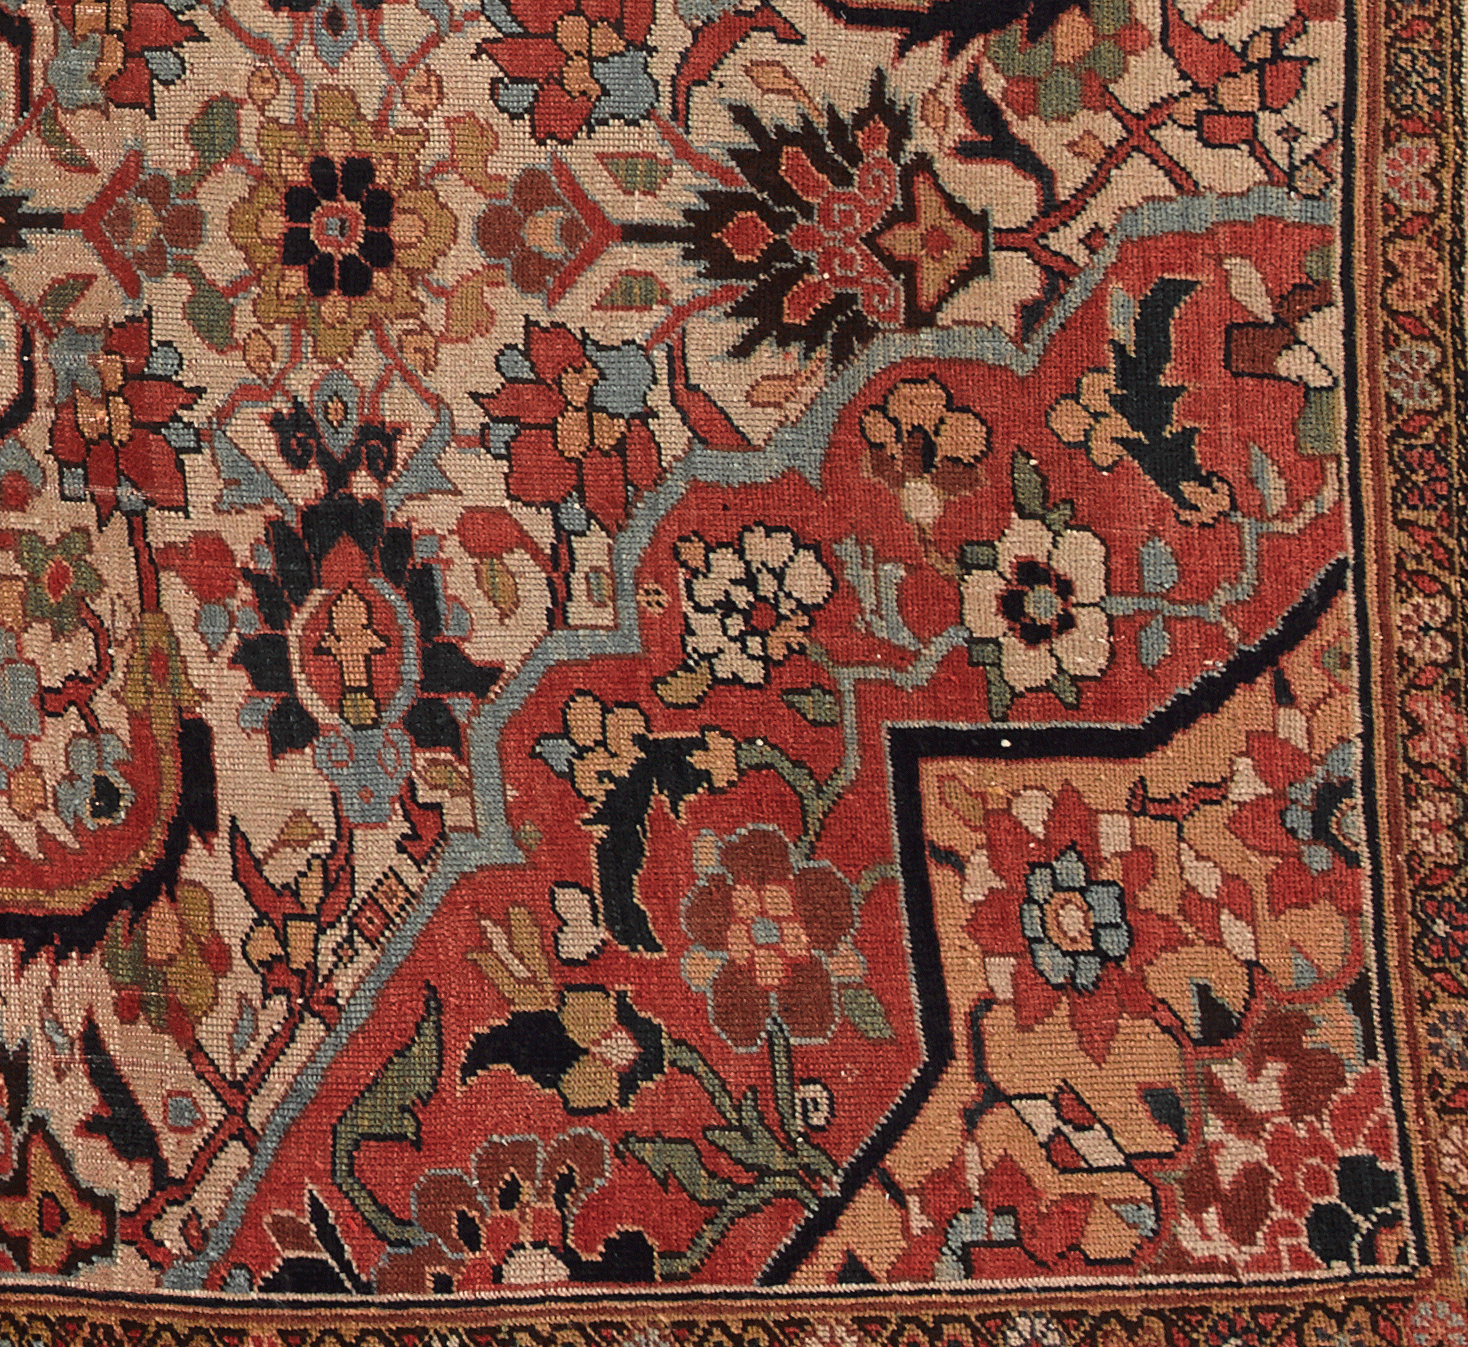 Above: A spandrel situated at a corner of the rug.